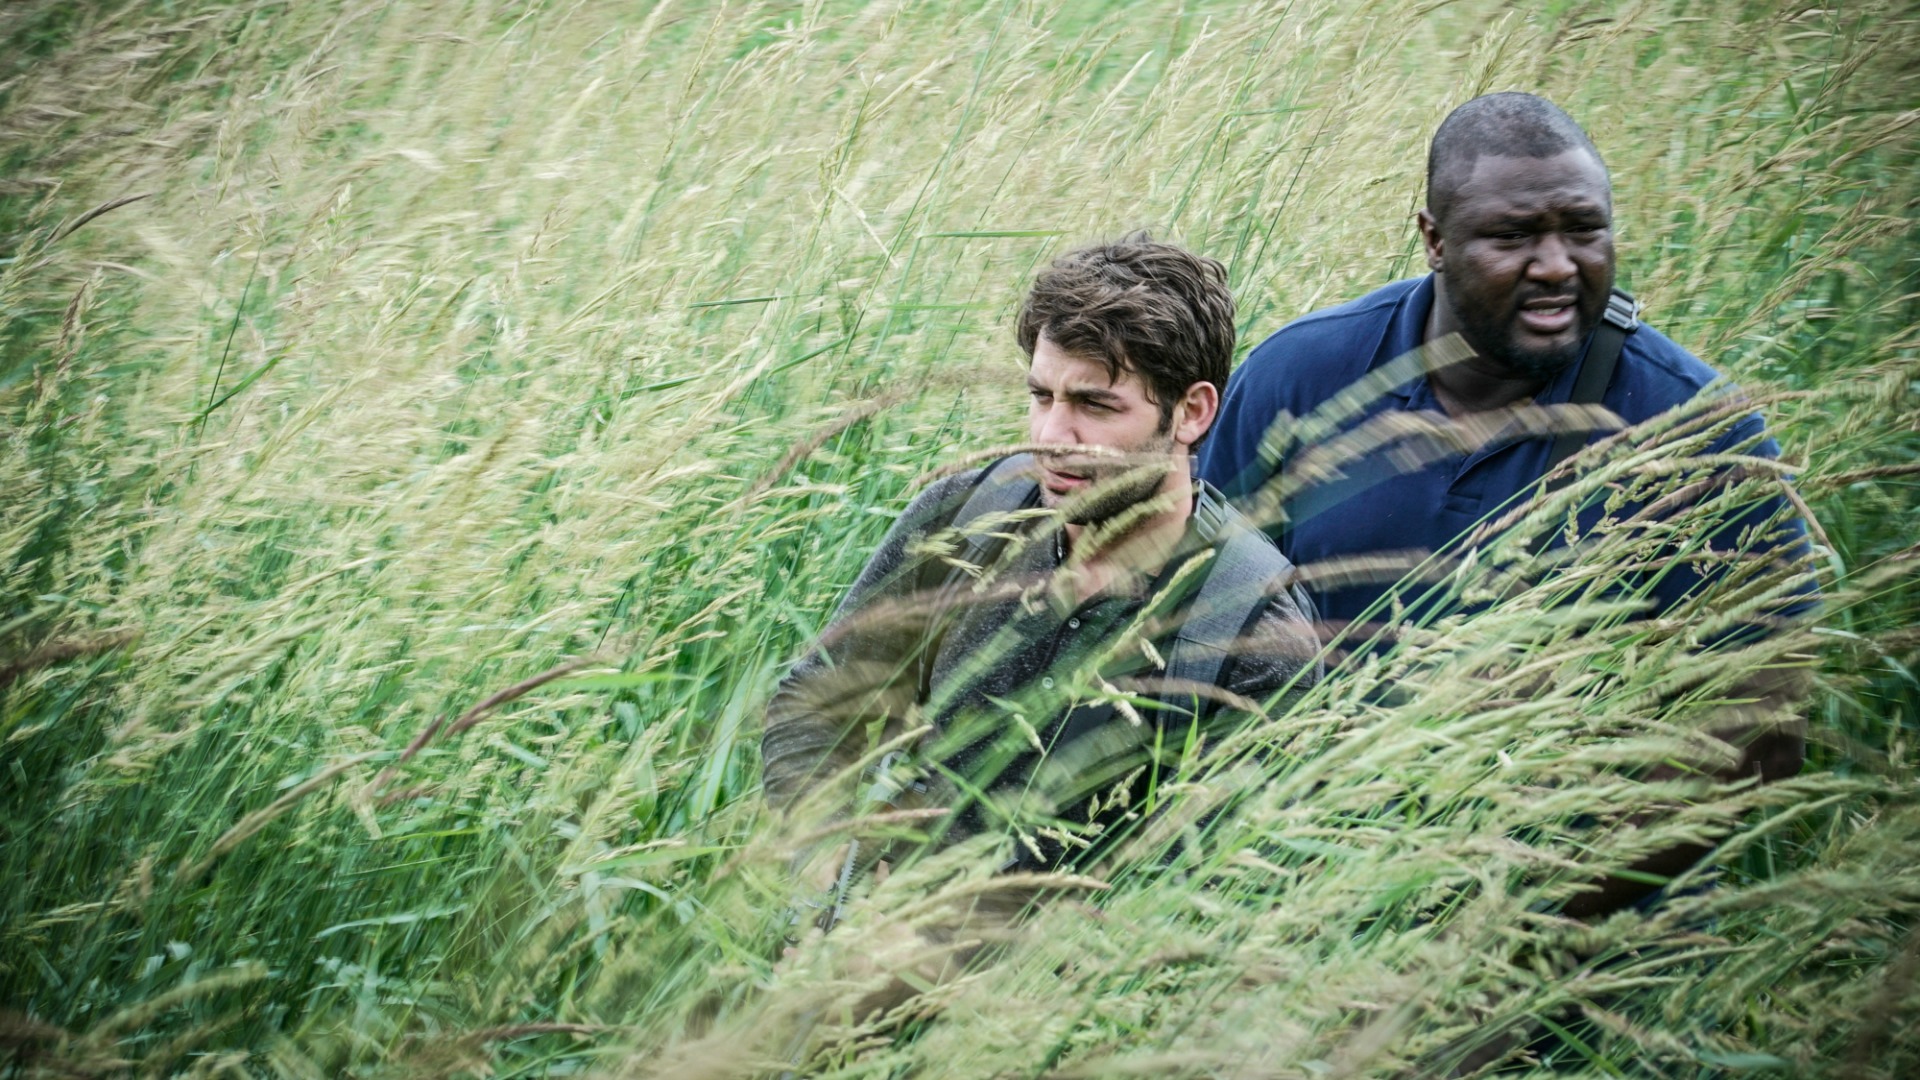 Jackson and Abraham move through high grass in their search.